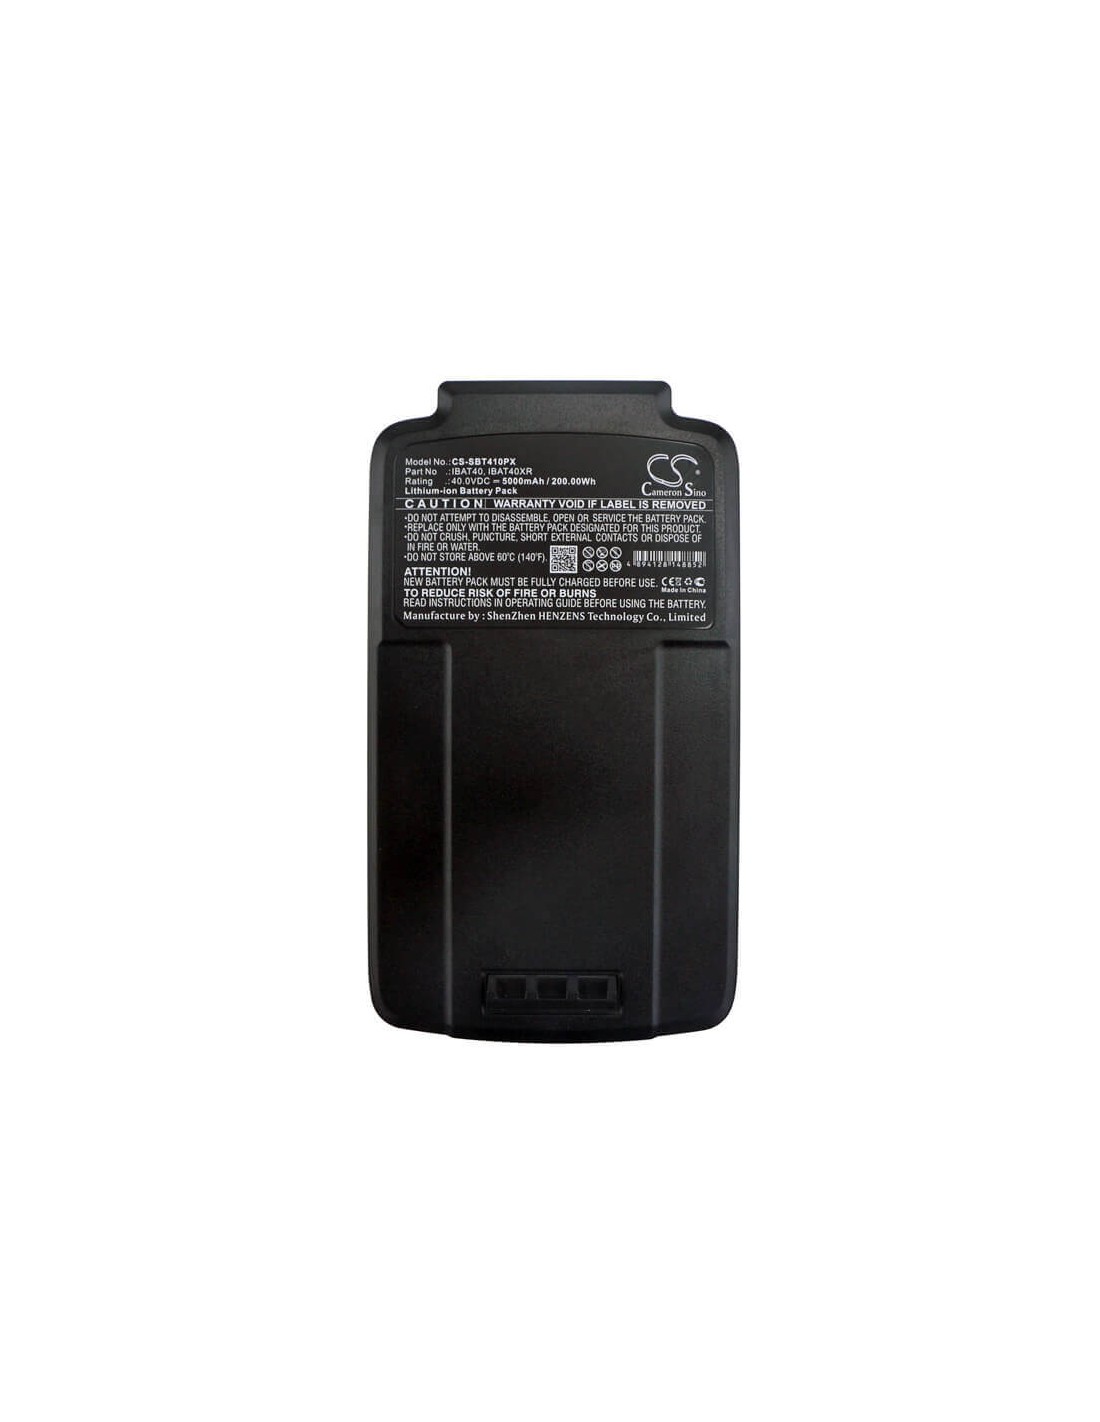 https://www.canadianbatteries.com/275595-thickbox_default/battery-for-snow-joe-ion13ss-ion16cs-ion16lm-40v-5000mah-20000wh.jpg